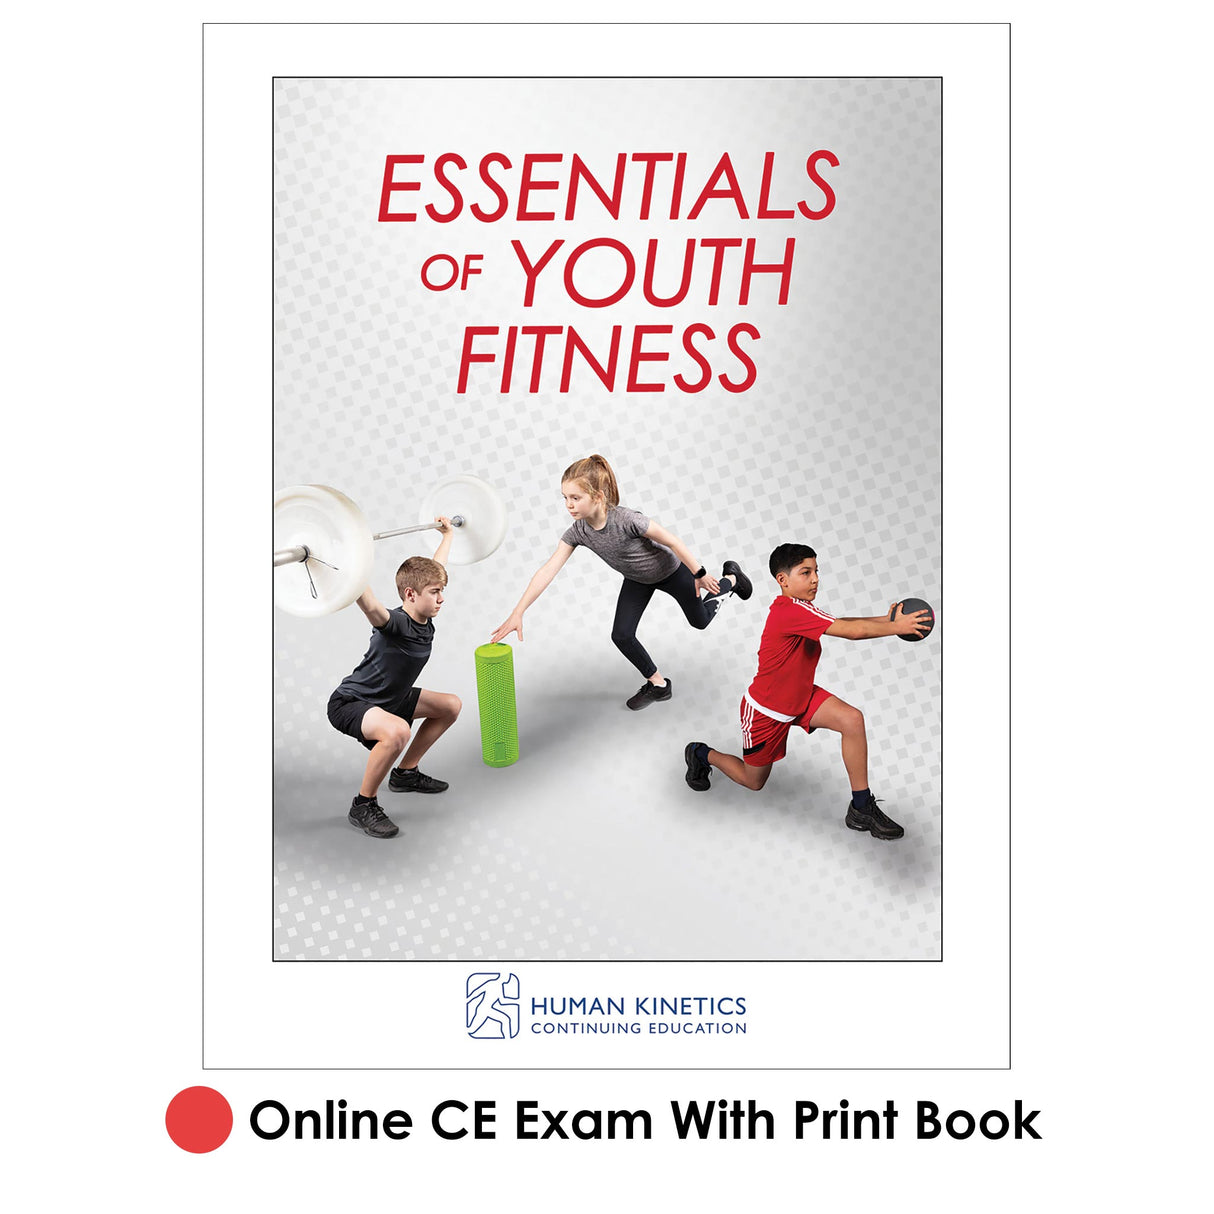 Essentials of Youth Fitness Online CE Exam With Print Book